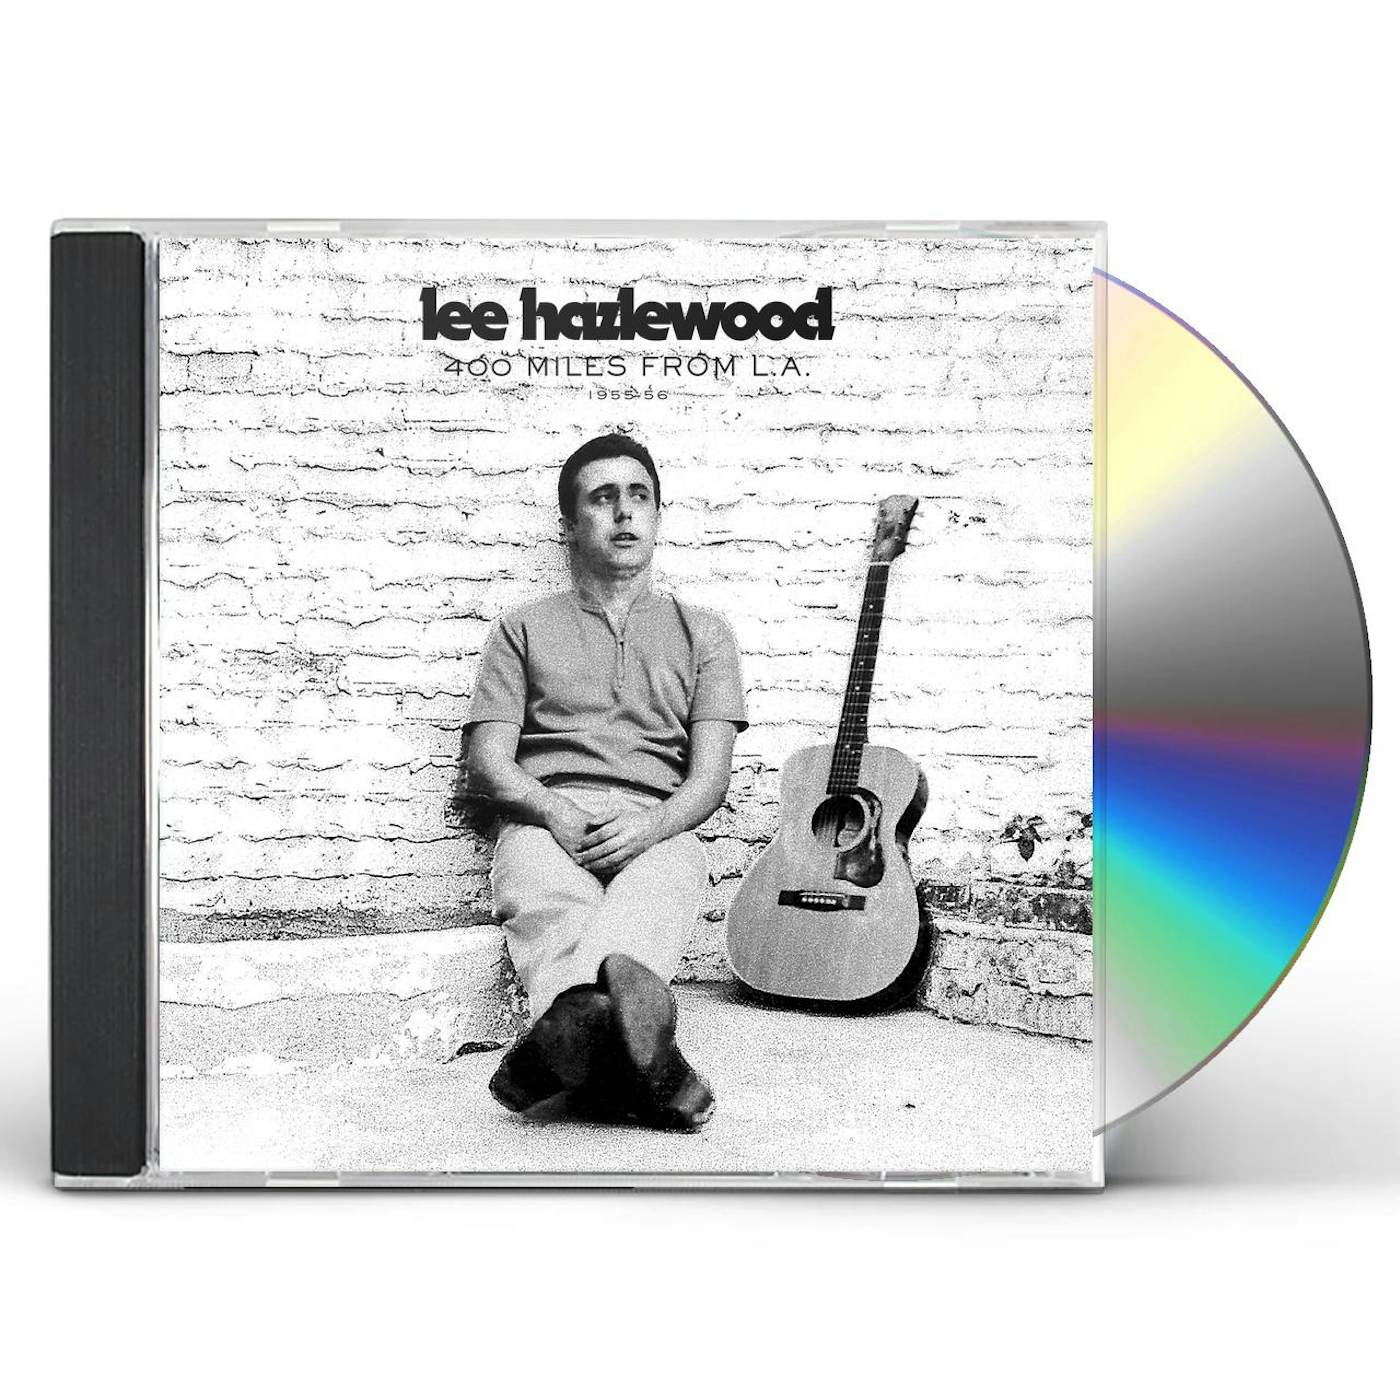 Lee Hazlewood 400 MILES FROM L.A. 1955-56 CD